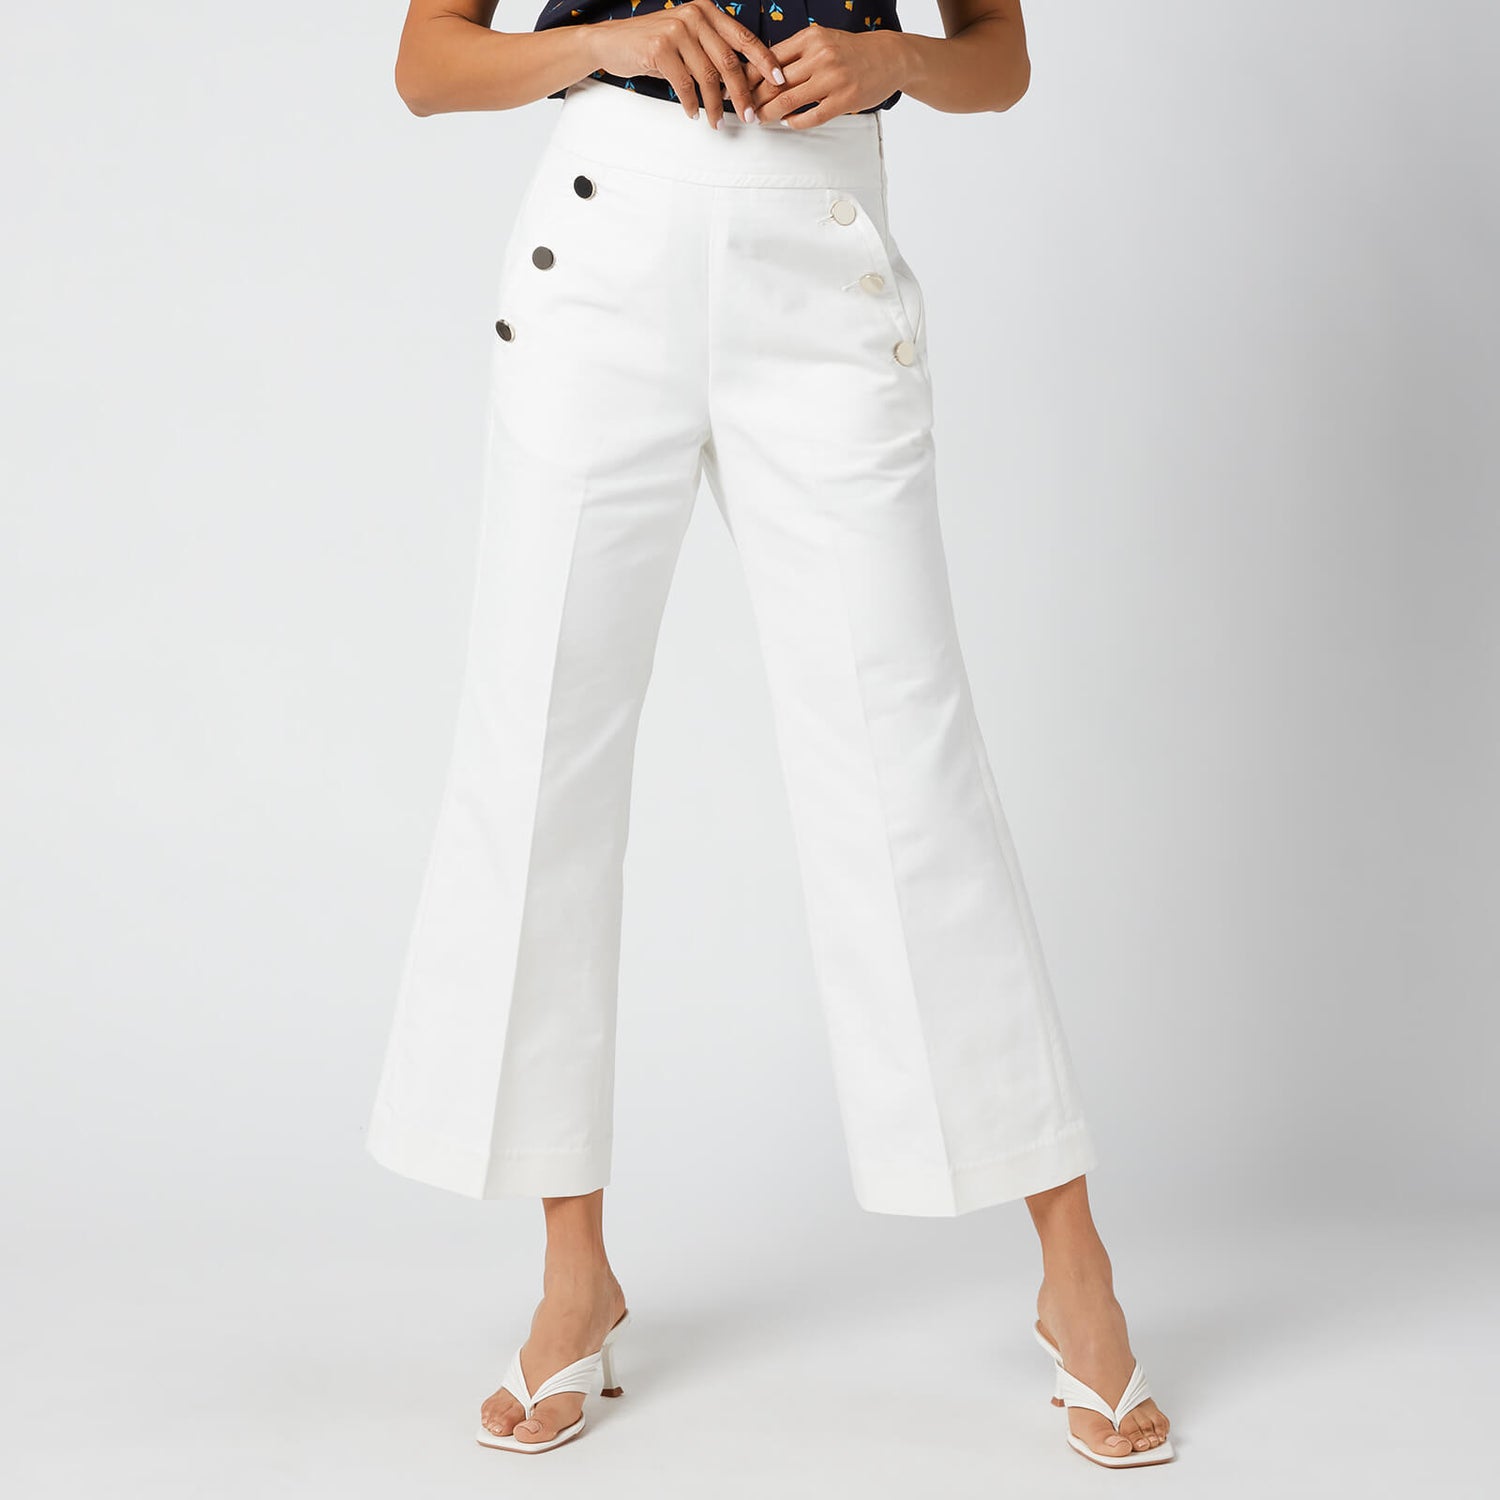 Kate Spade New York Women's Sailor Twill Pant - French Cream